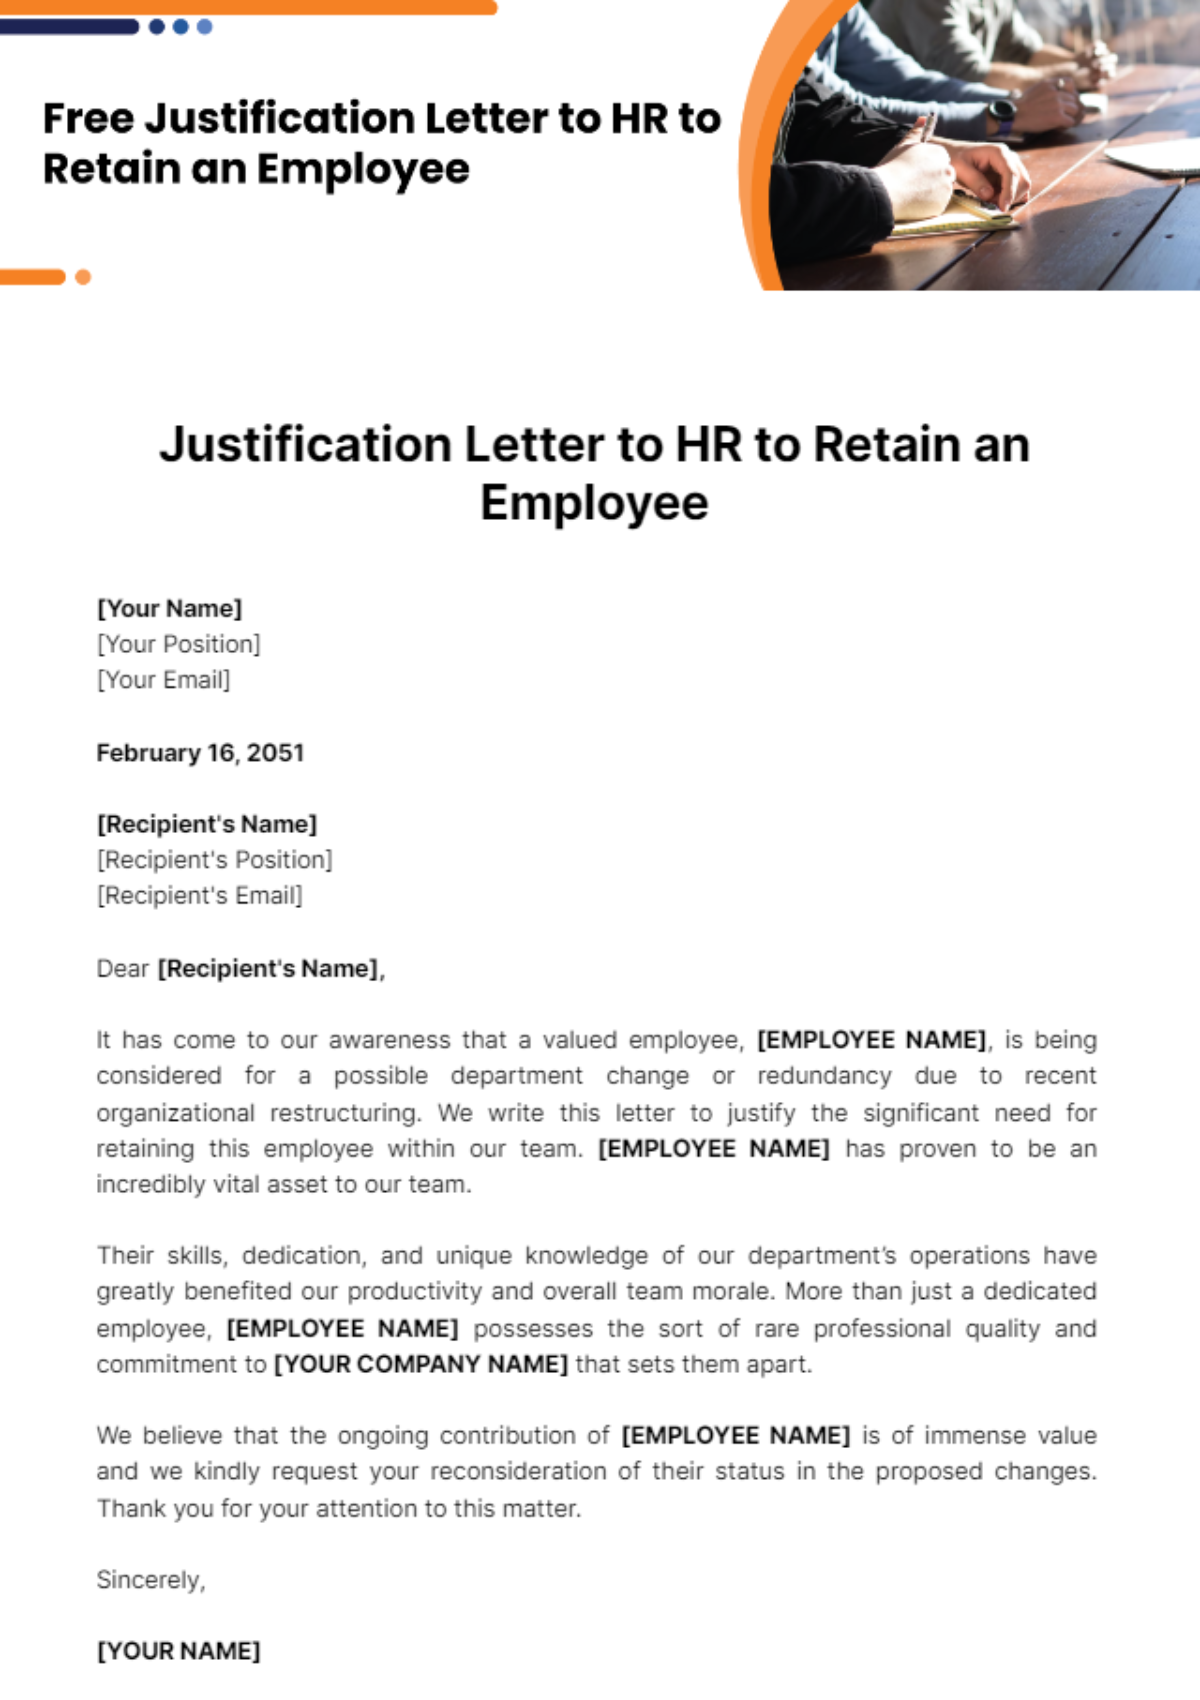 Justification Letter to HR to Retain an Employee Template